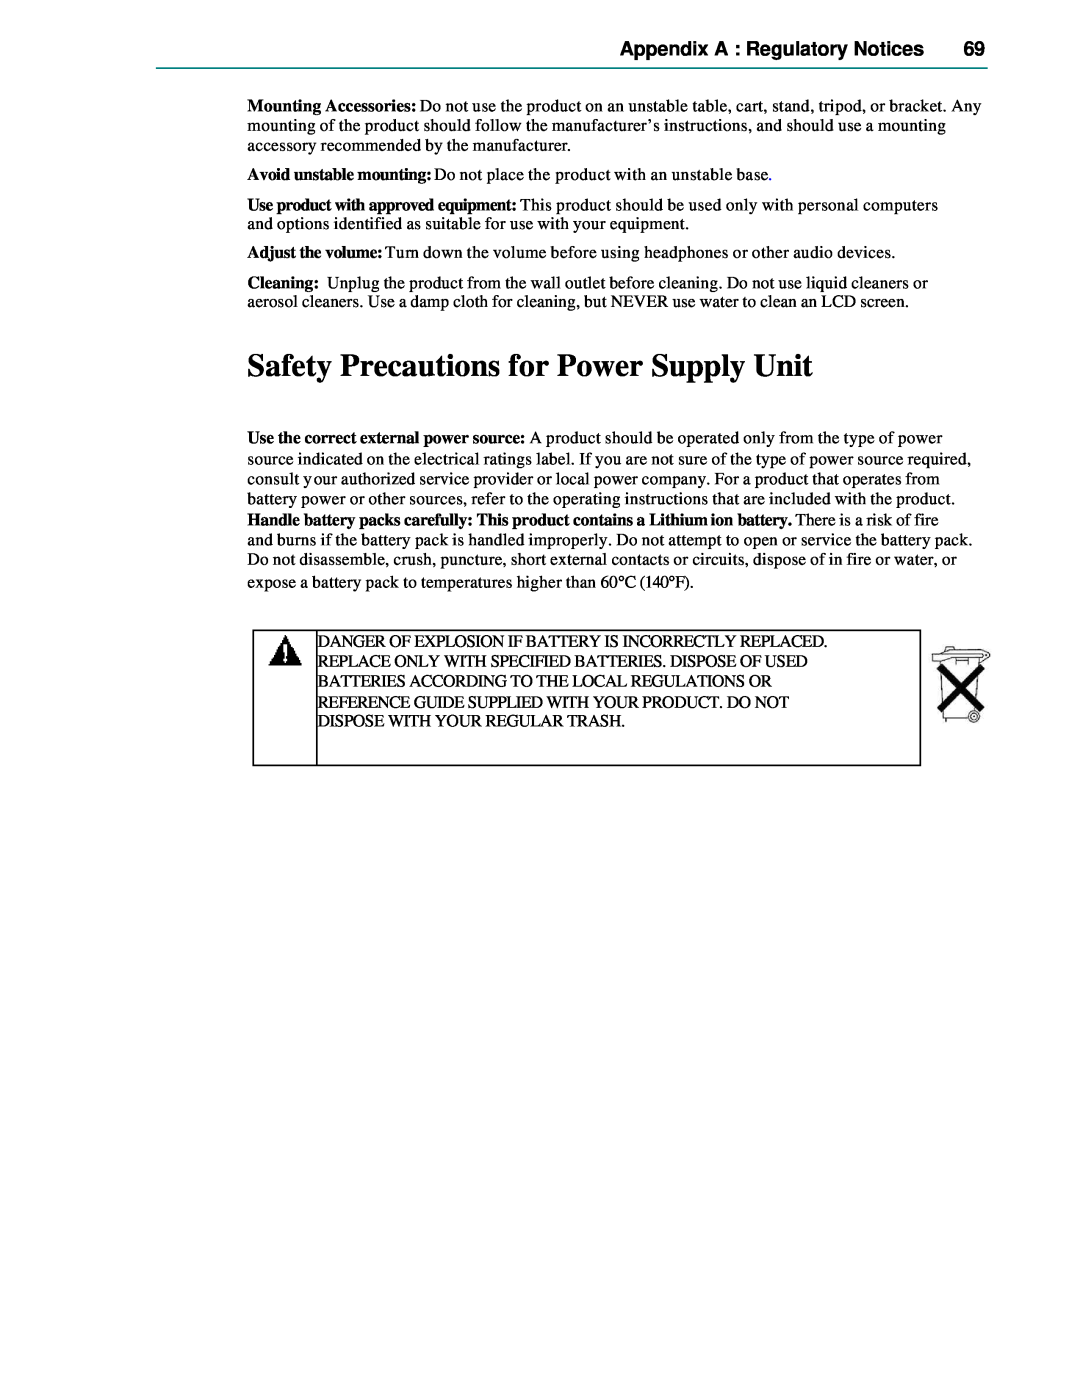 Microsoft Smartphone 2002 manual Safety Precautions for Power Supply Unit, Appendix A Regulatory Notices 